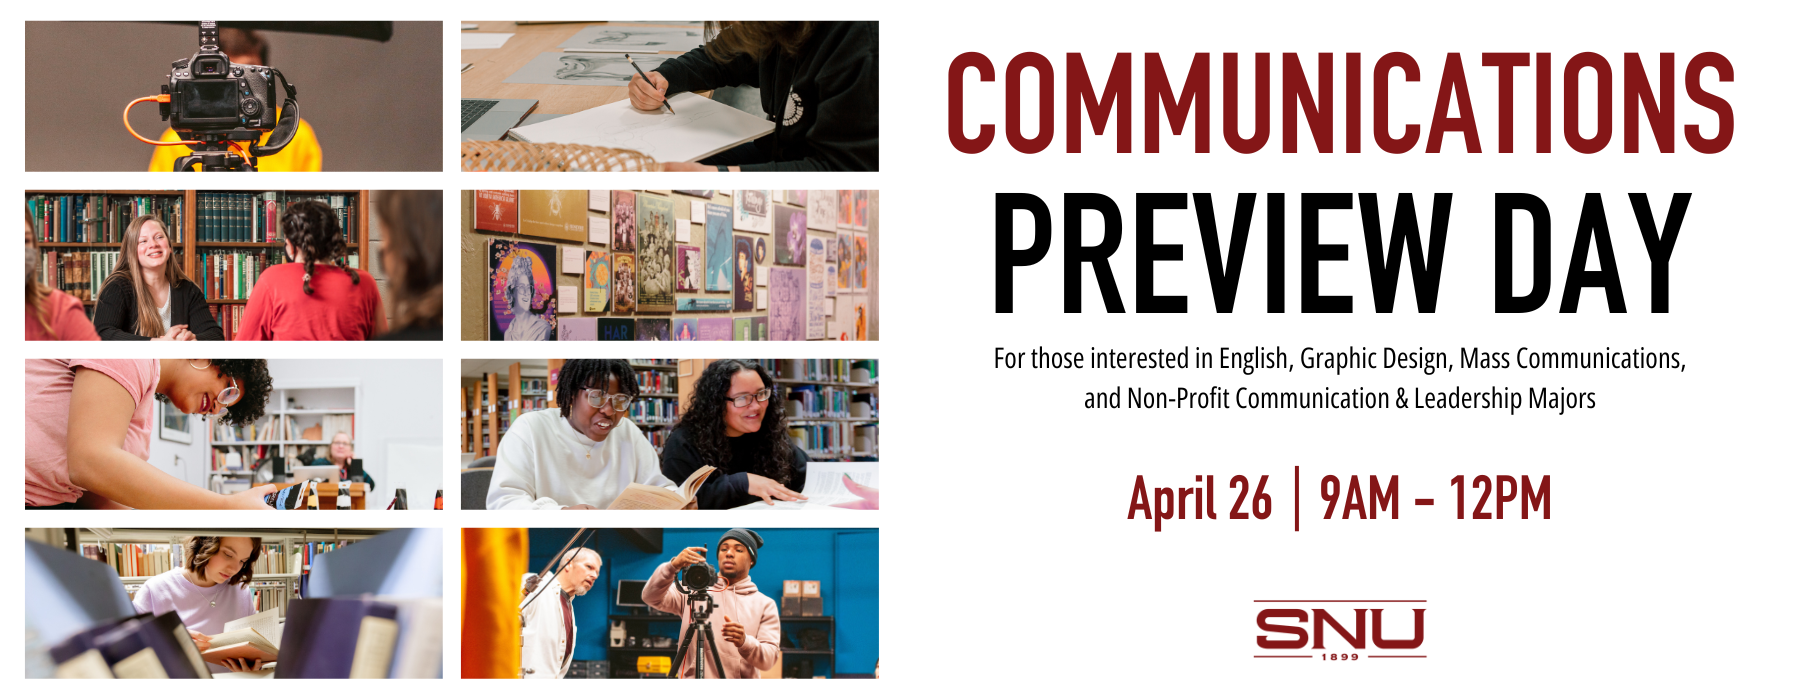 Communications Preview Day - For those interested in English, Mass Communications, Graphic Design and Non-Profit Leadership